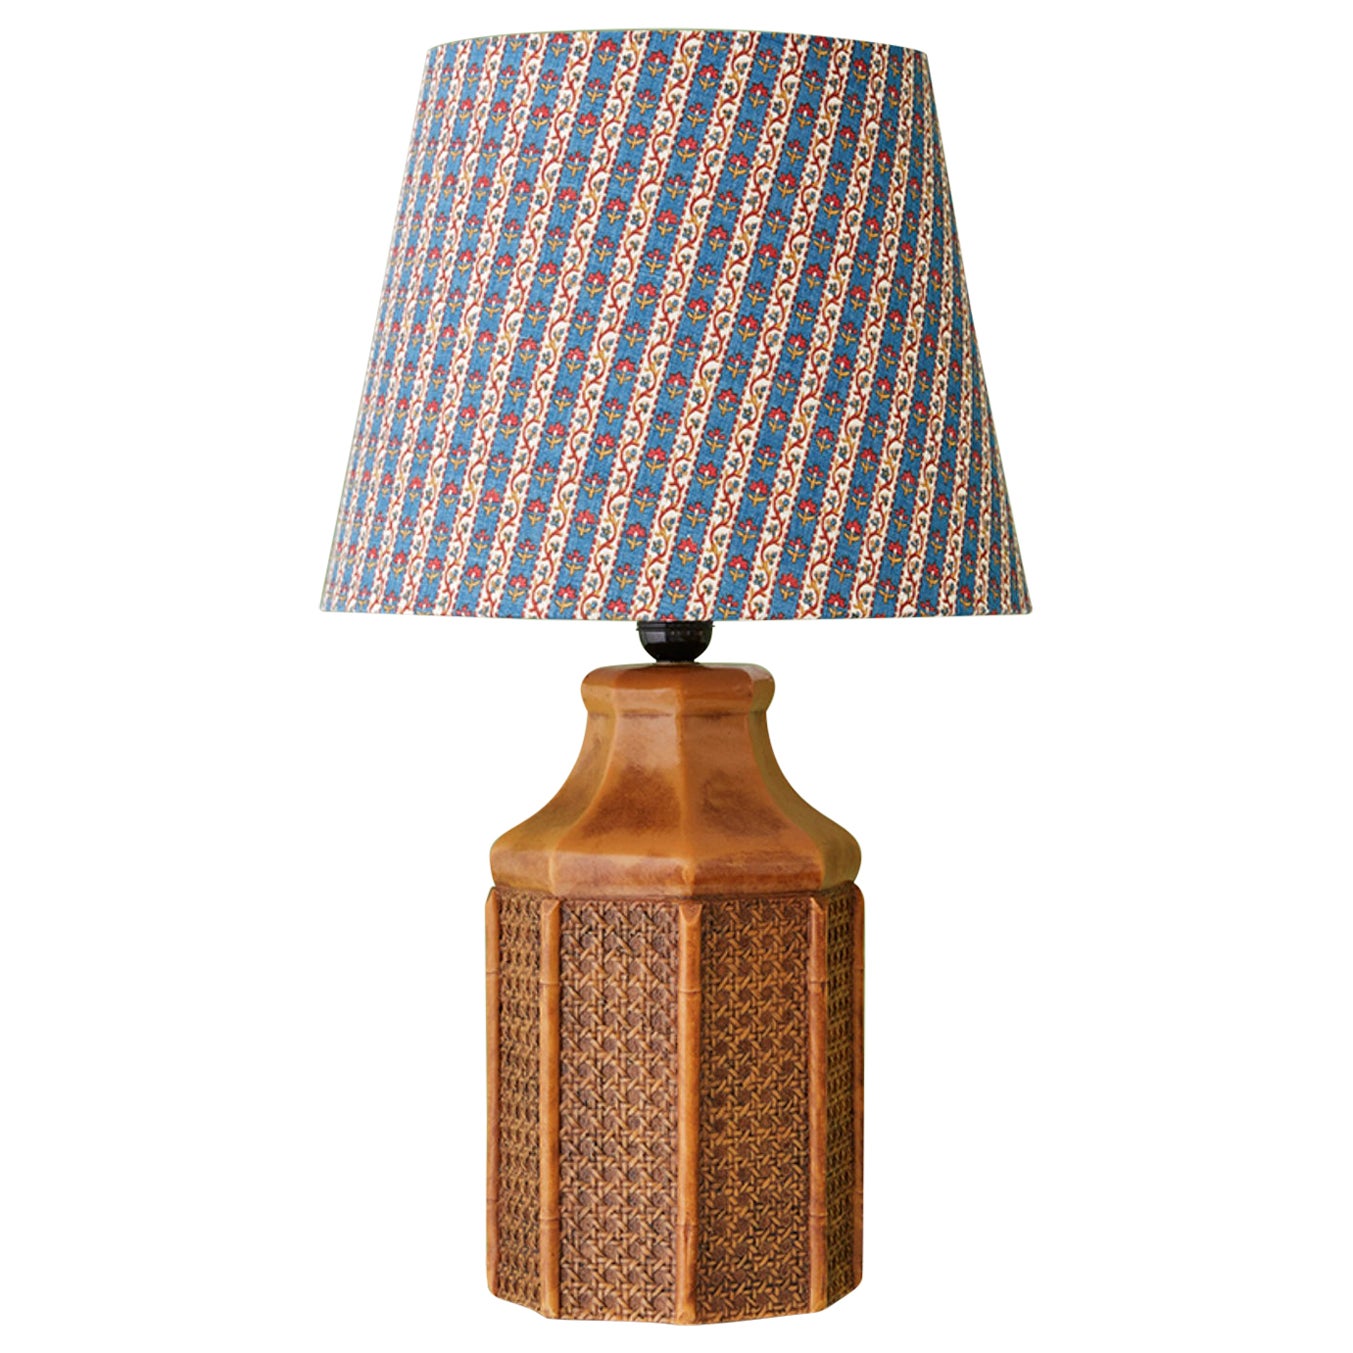 Vintage Table Lamp with Bamboo and Cane Webbing Details, France, 20th Century For Sale